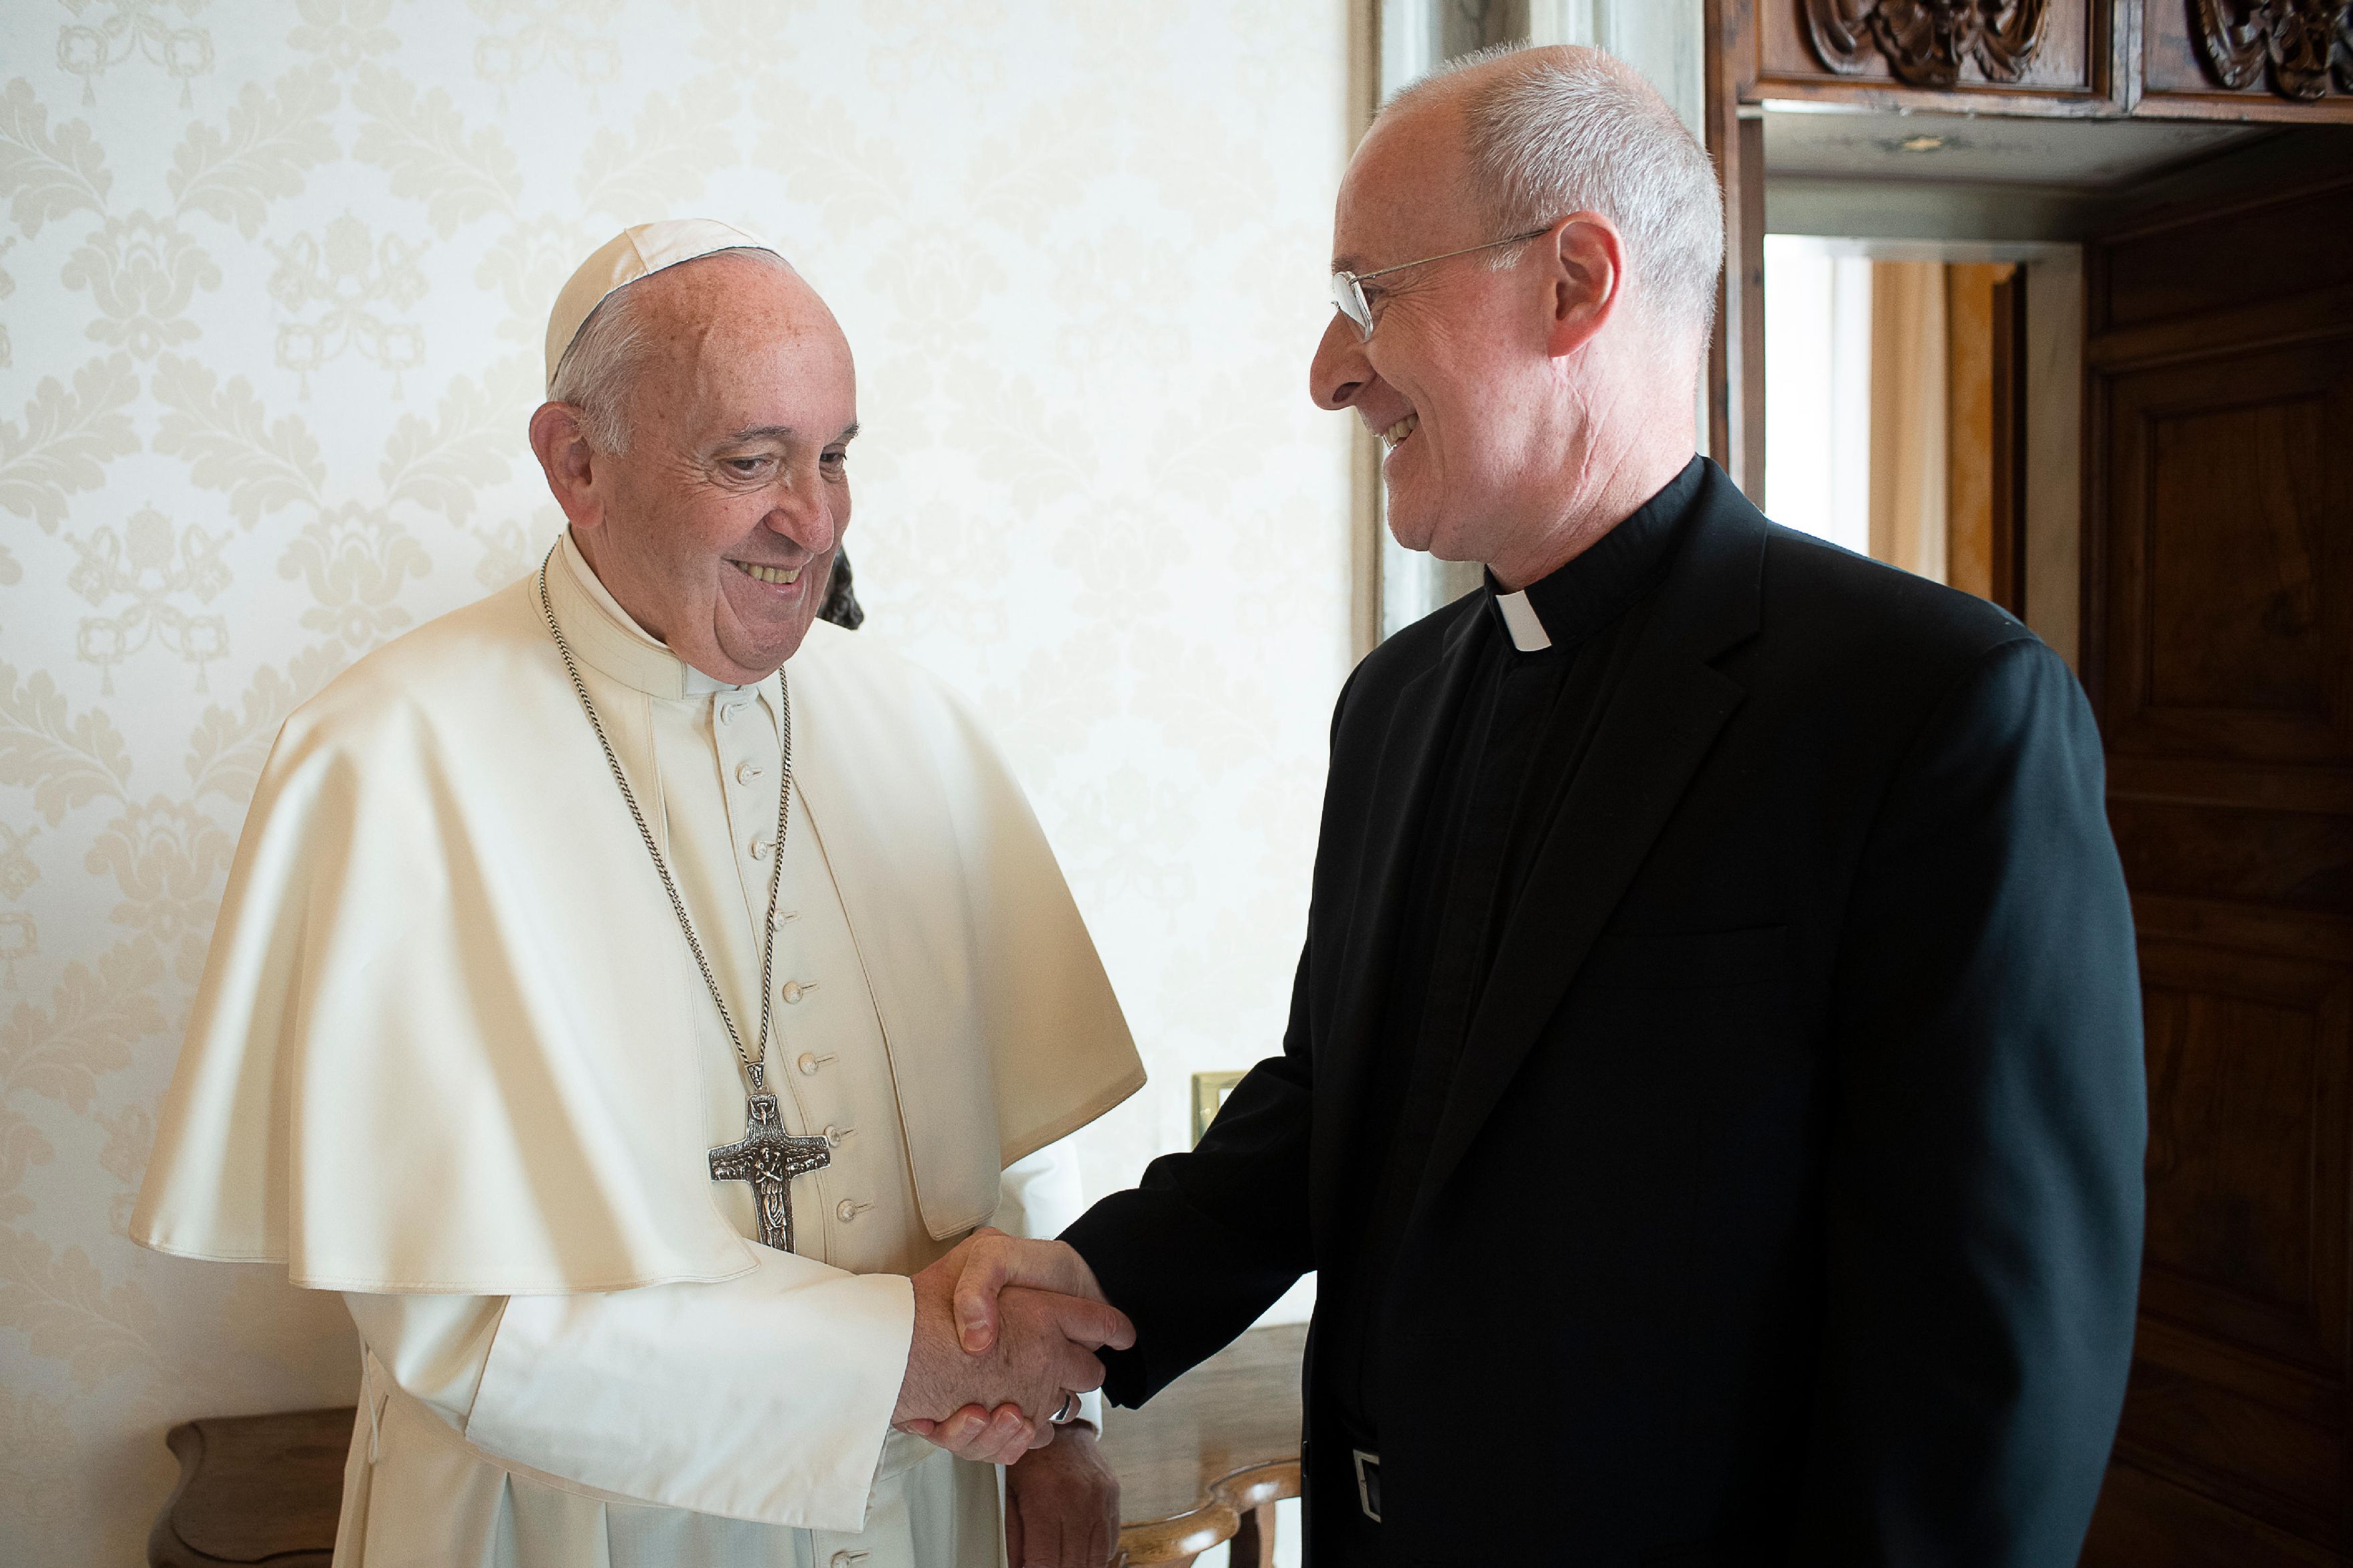 Fr. James Martin Reflects on Meeting With Pope - The Tablet